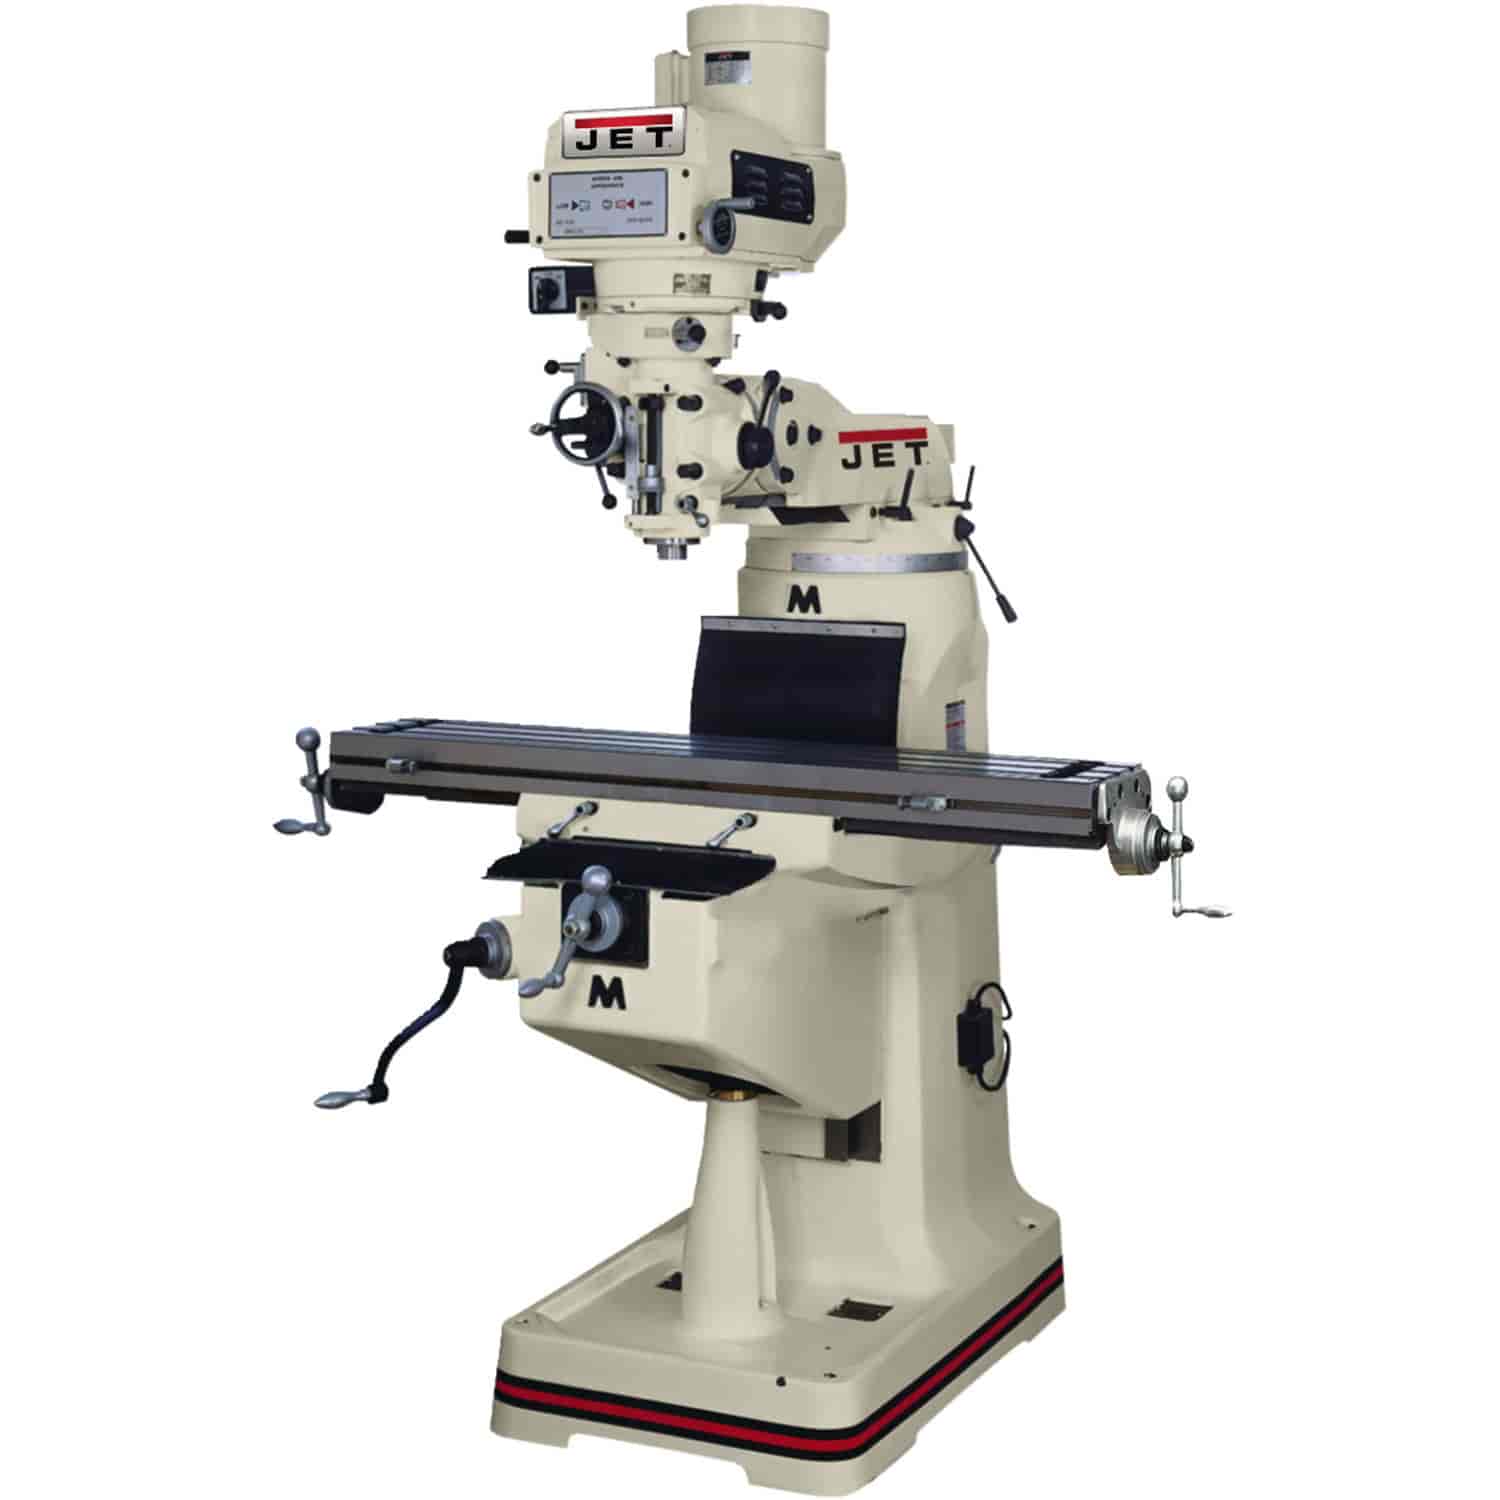 JTM-4VS Mill With ACU-RITE 200S DRO With X-Axis Powerfeed and Power Draw Bar